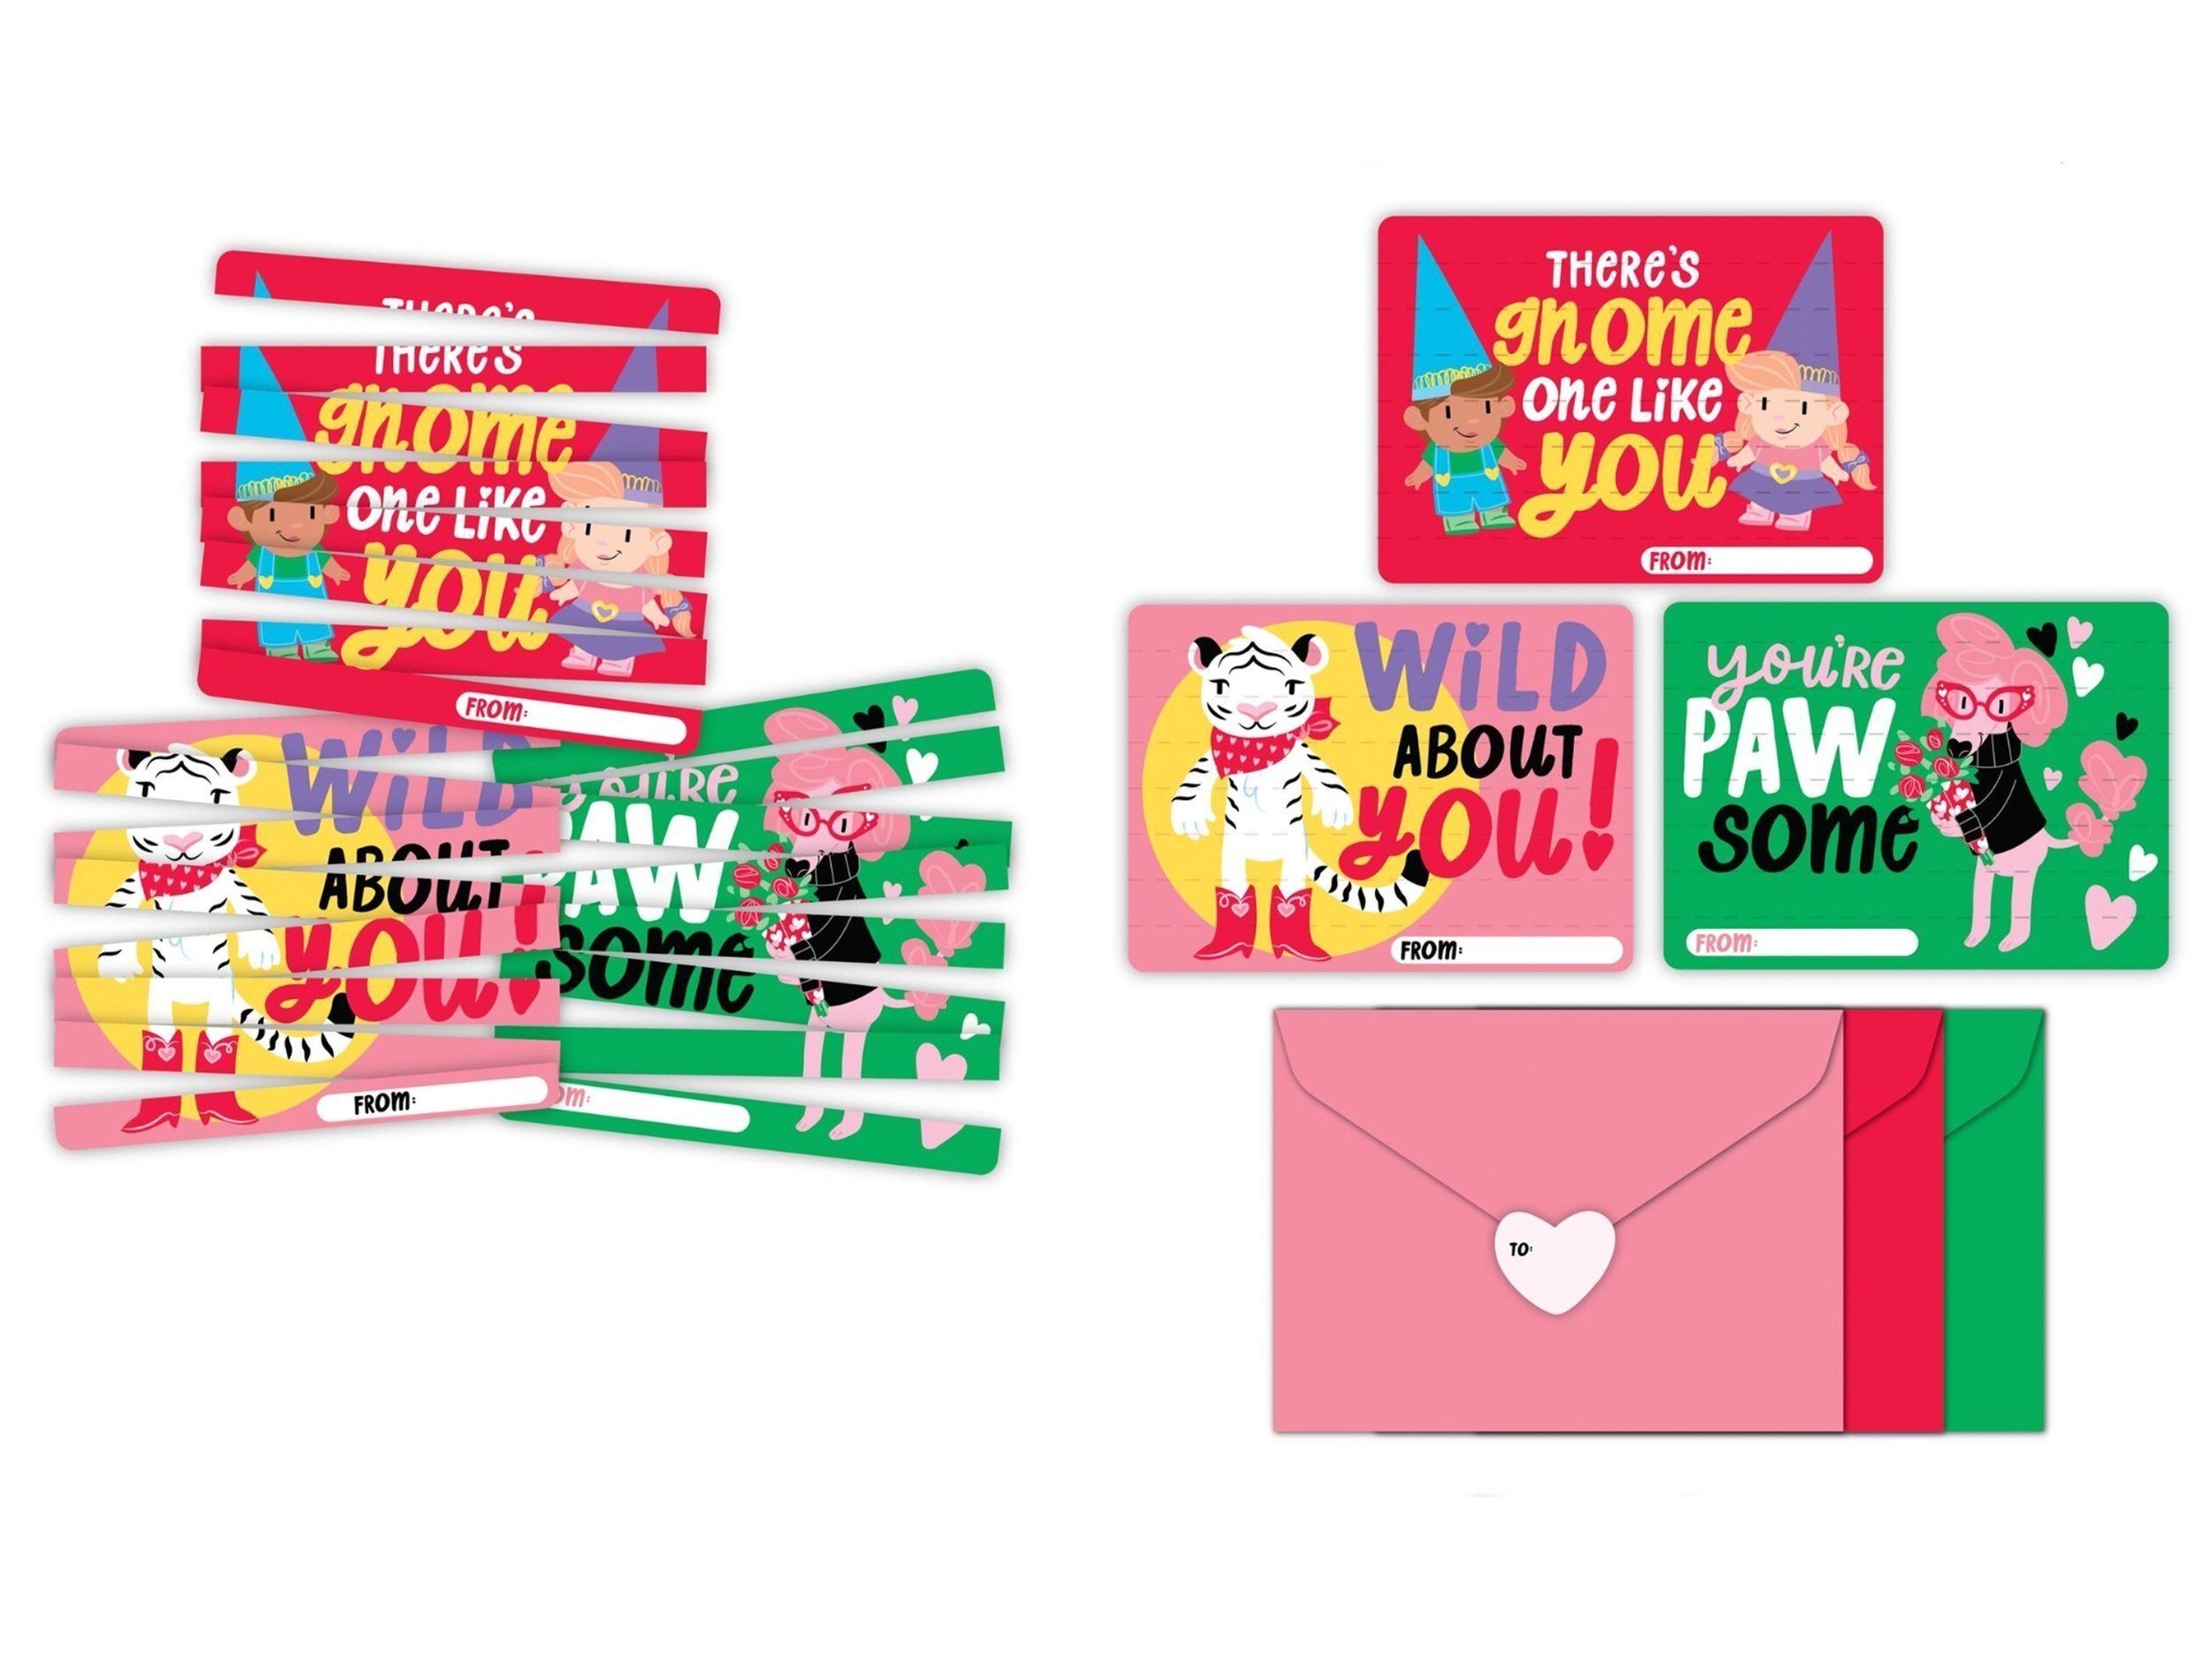 Valentine's Day Piece Together Card Concepts for Walmart